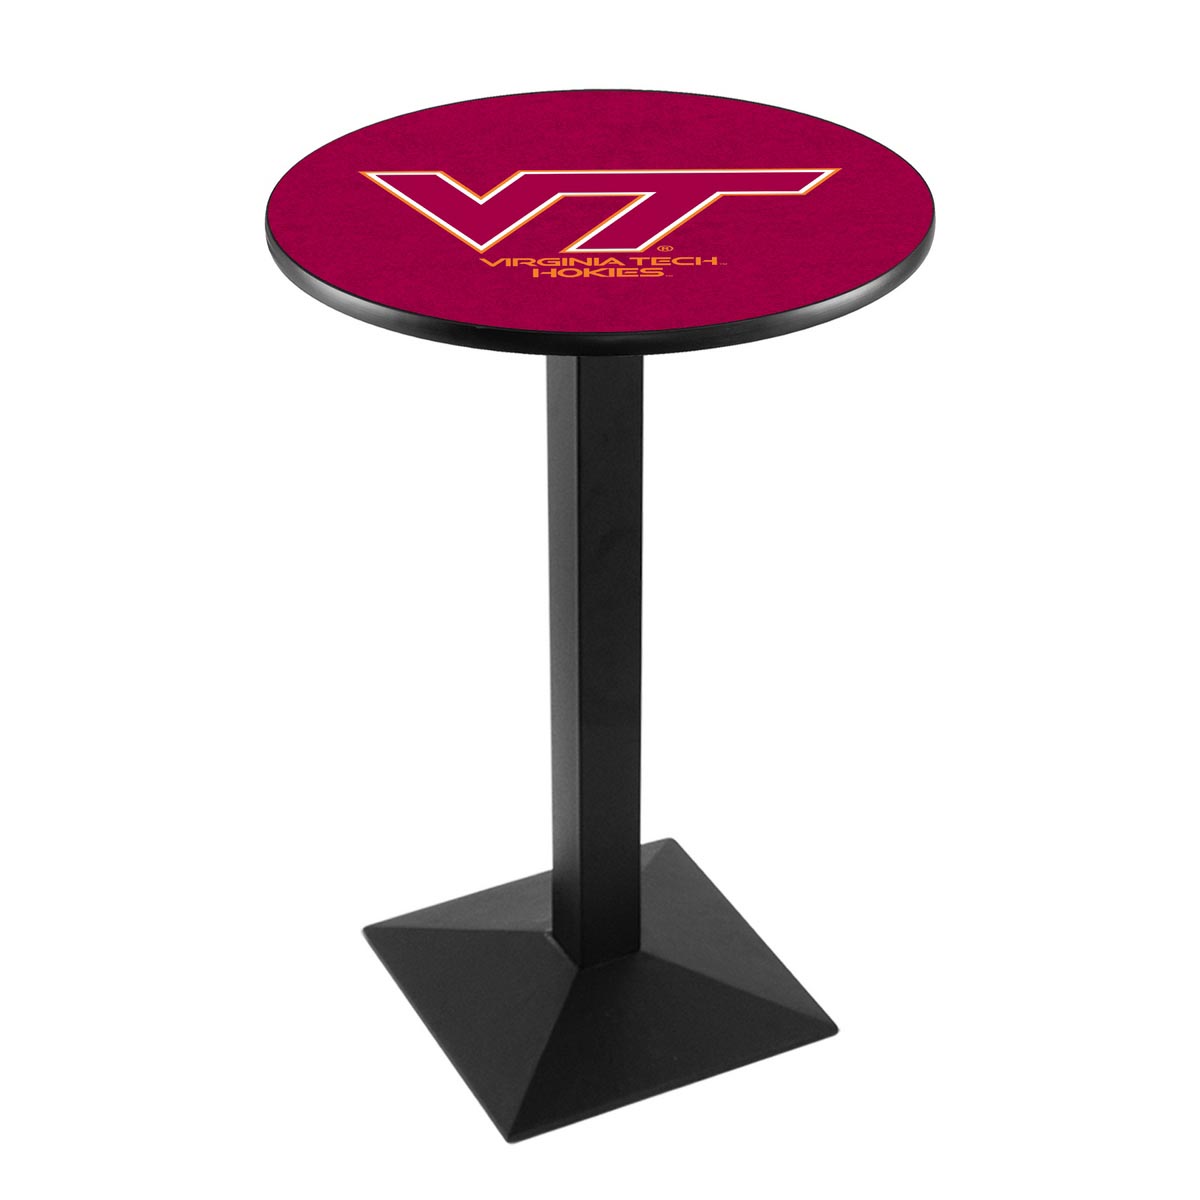 Virginia Tech University Logo Pub Bar Table With Square Stand